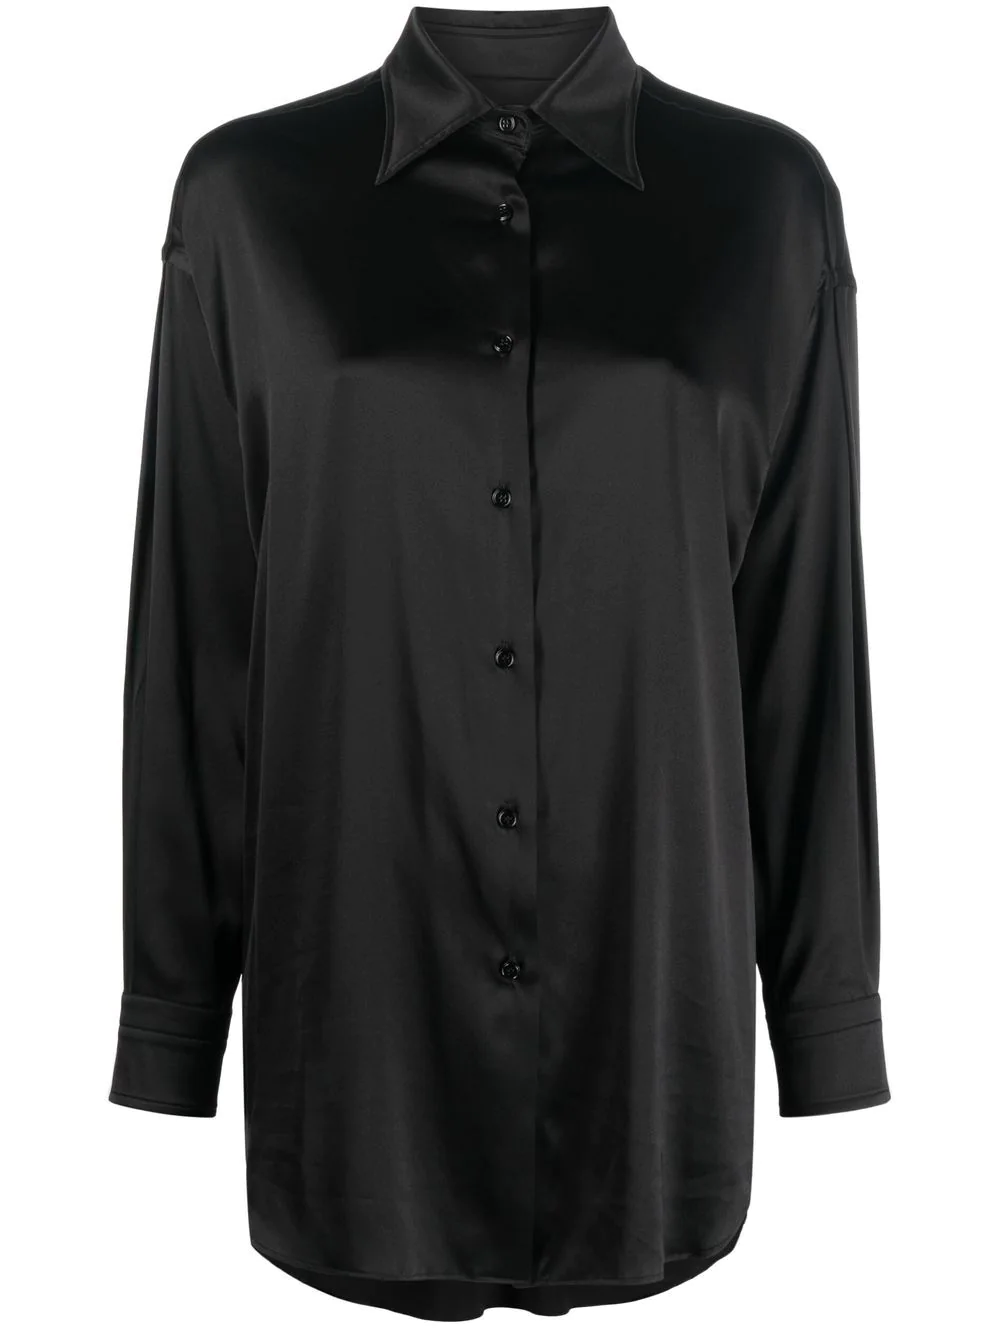 TOM FORD POINTED COLLAR SHIRT